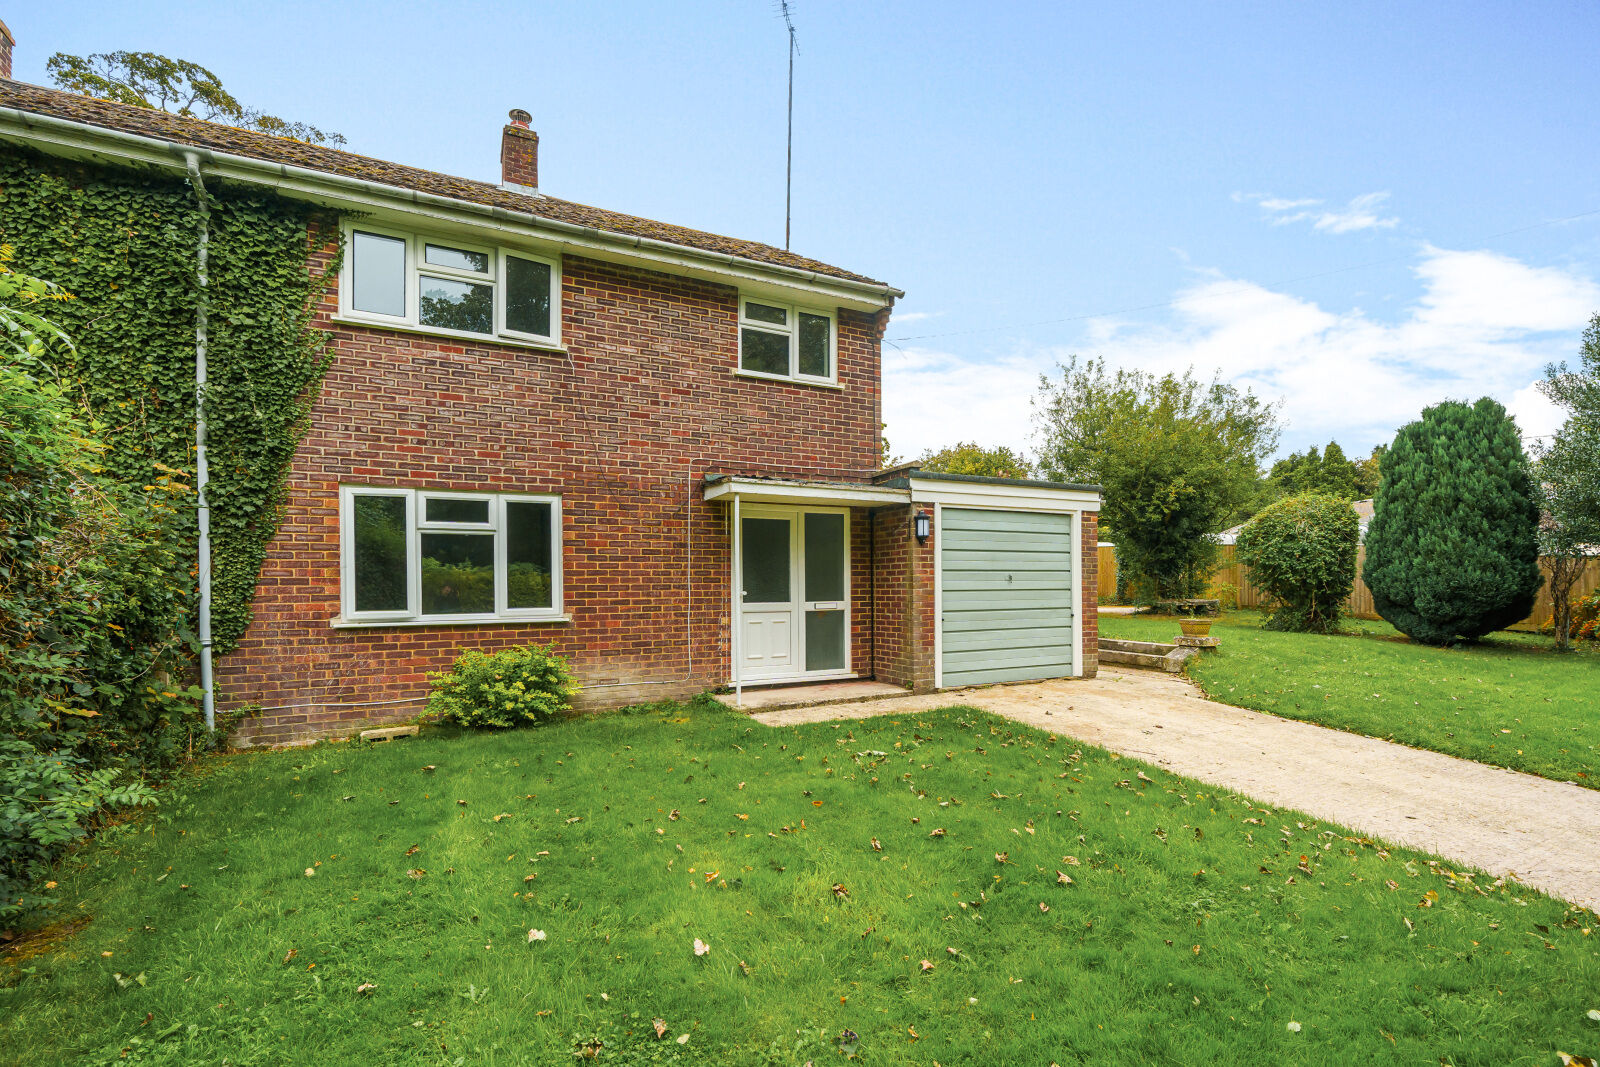 3 bedroom semi detached house to rent, Available from 06/05/2024 Ginge, Wantage, OX12, main image